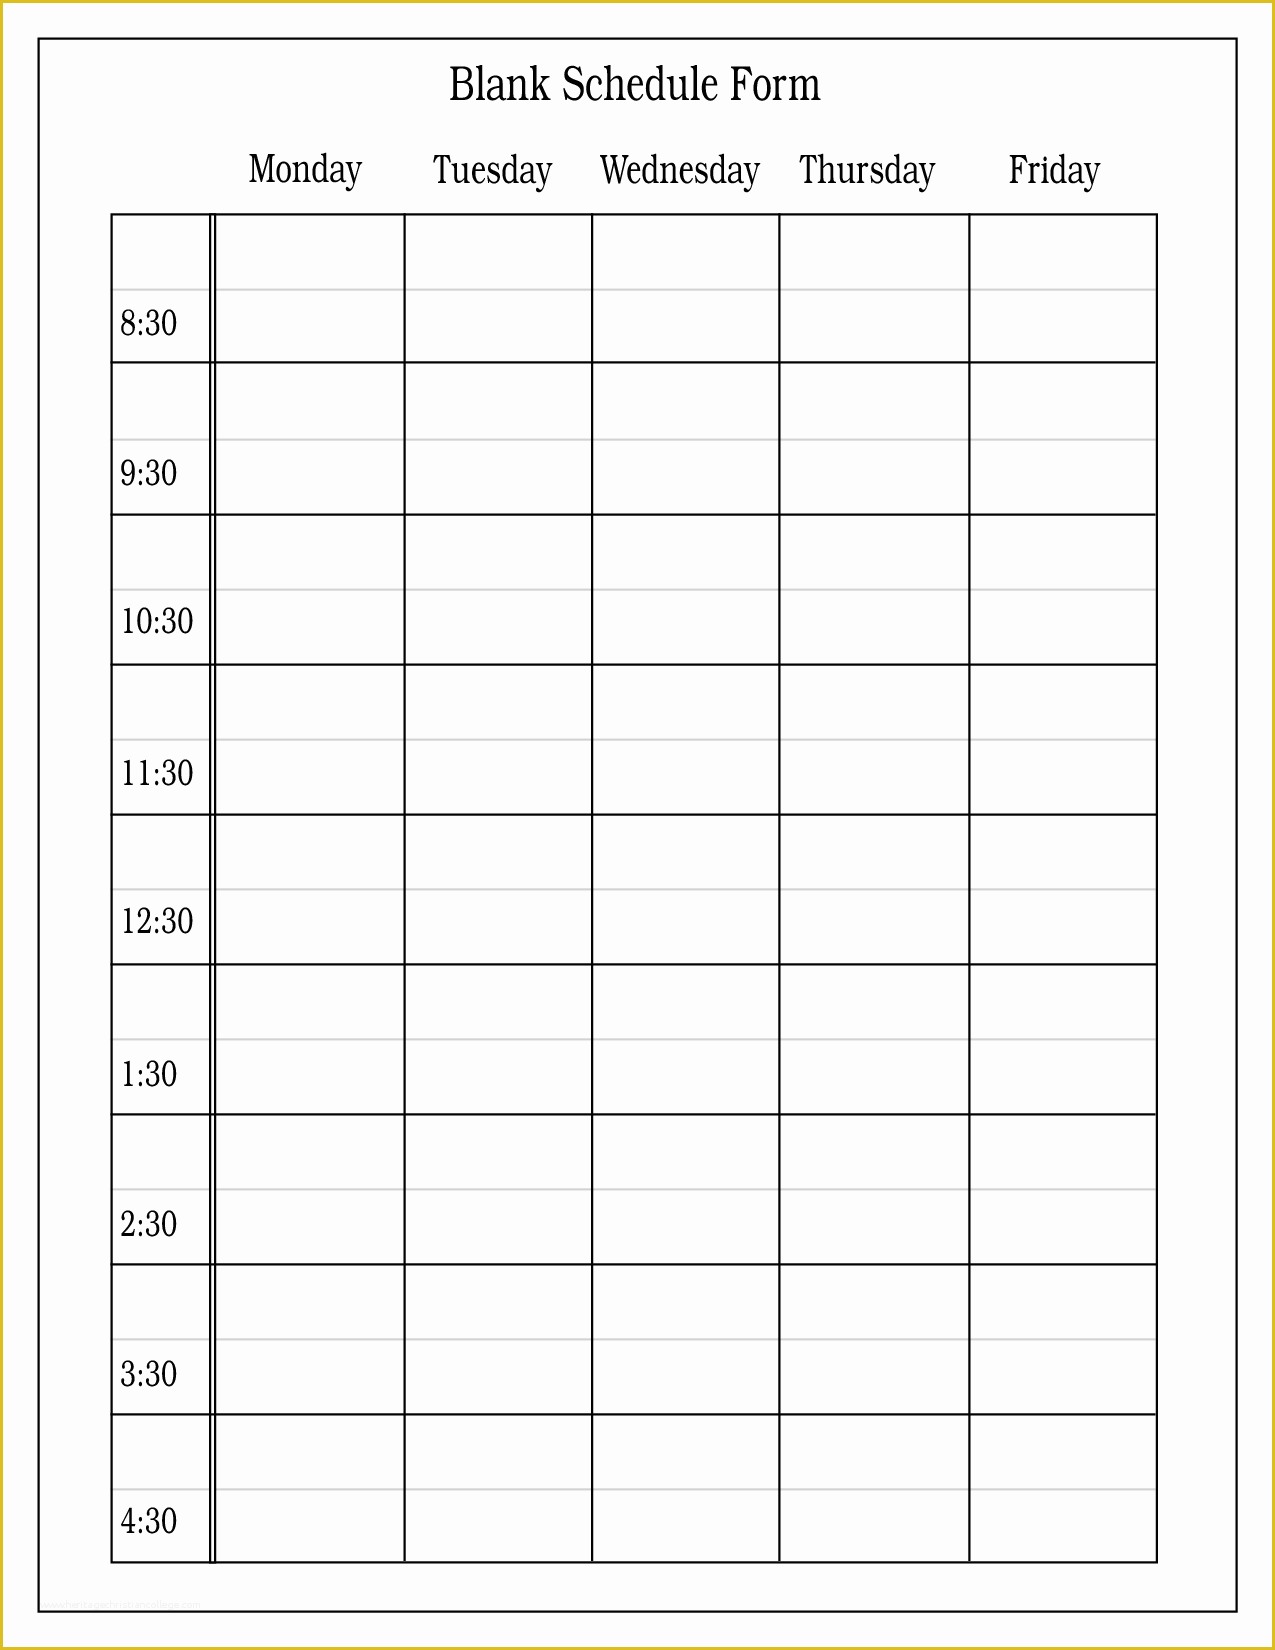 Schedule Template Free Download Of Employee Scheduling A Free Employee Schedule